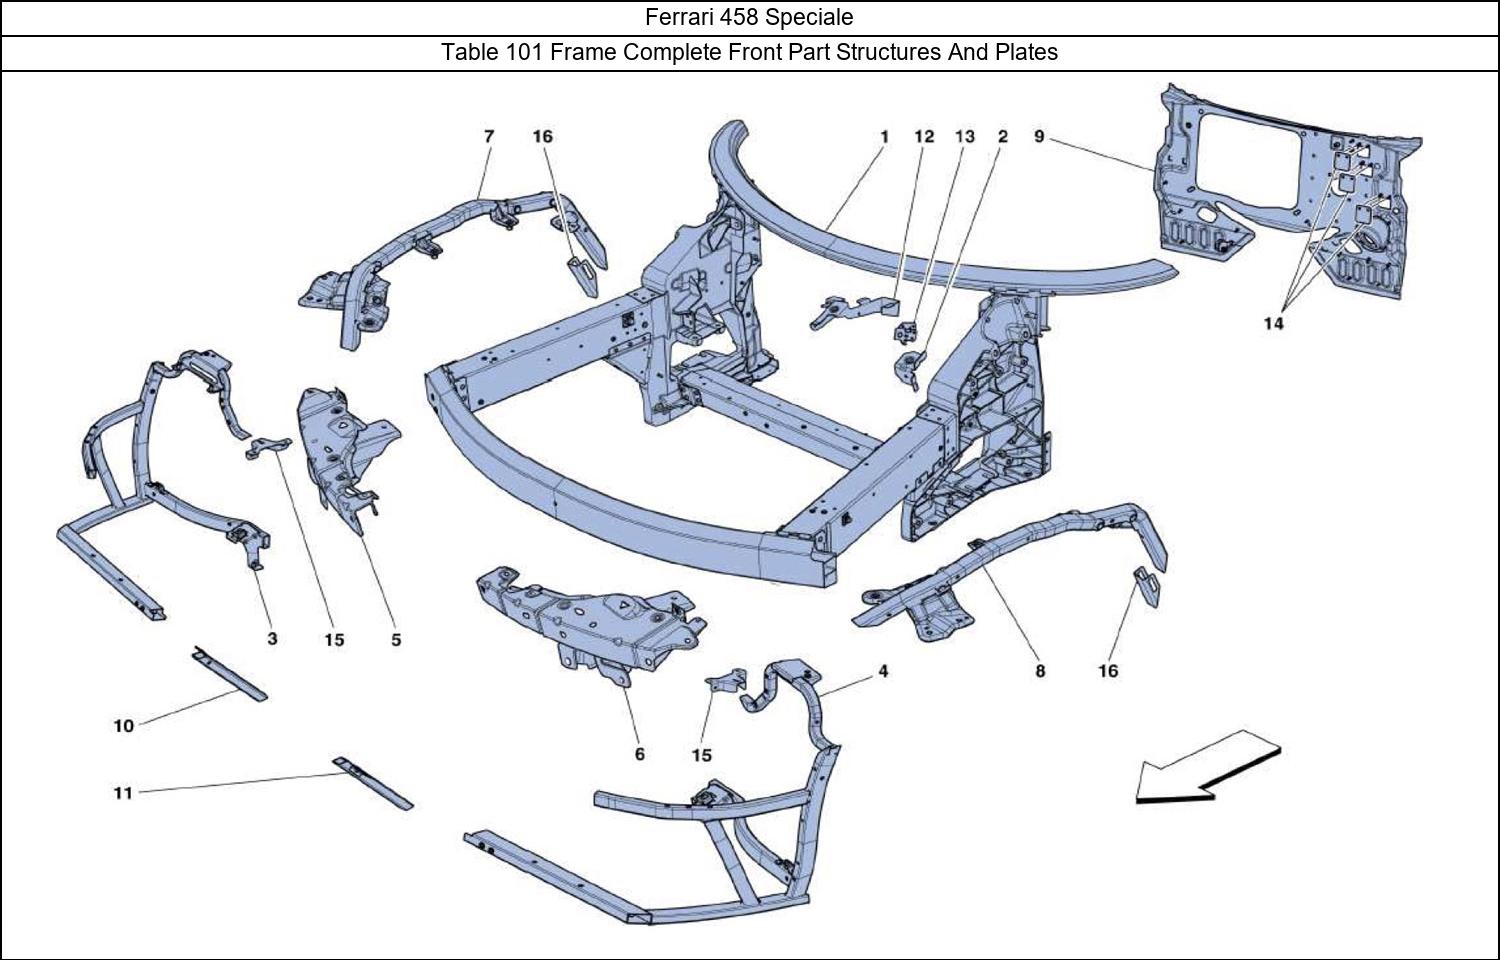 Ferrari Parts Ferrari 458 Speciale Table 101 Frame Complete Front Part Structures And Plates